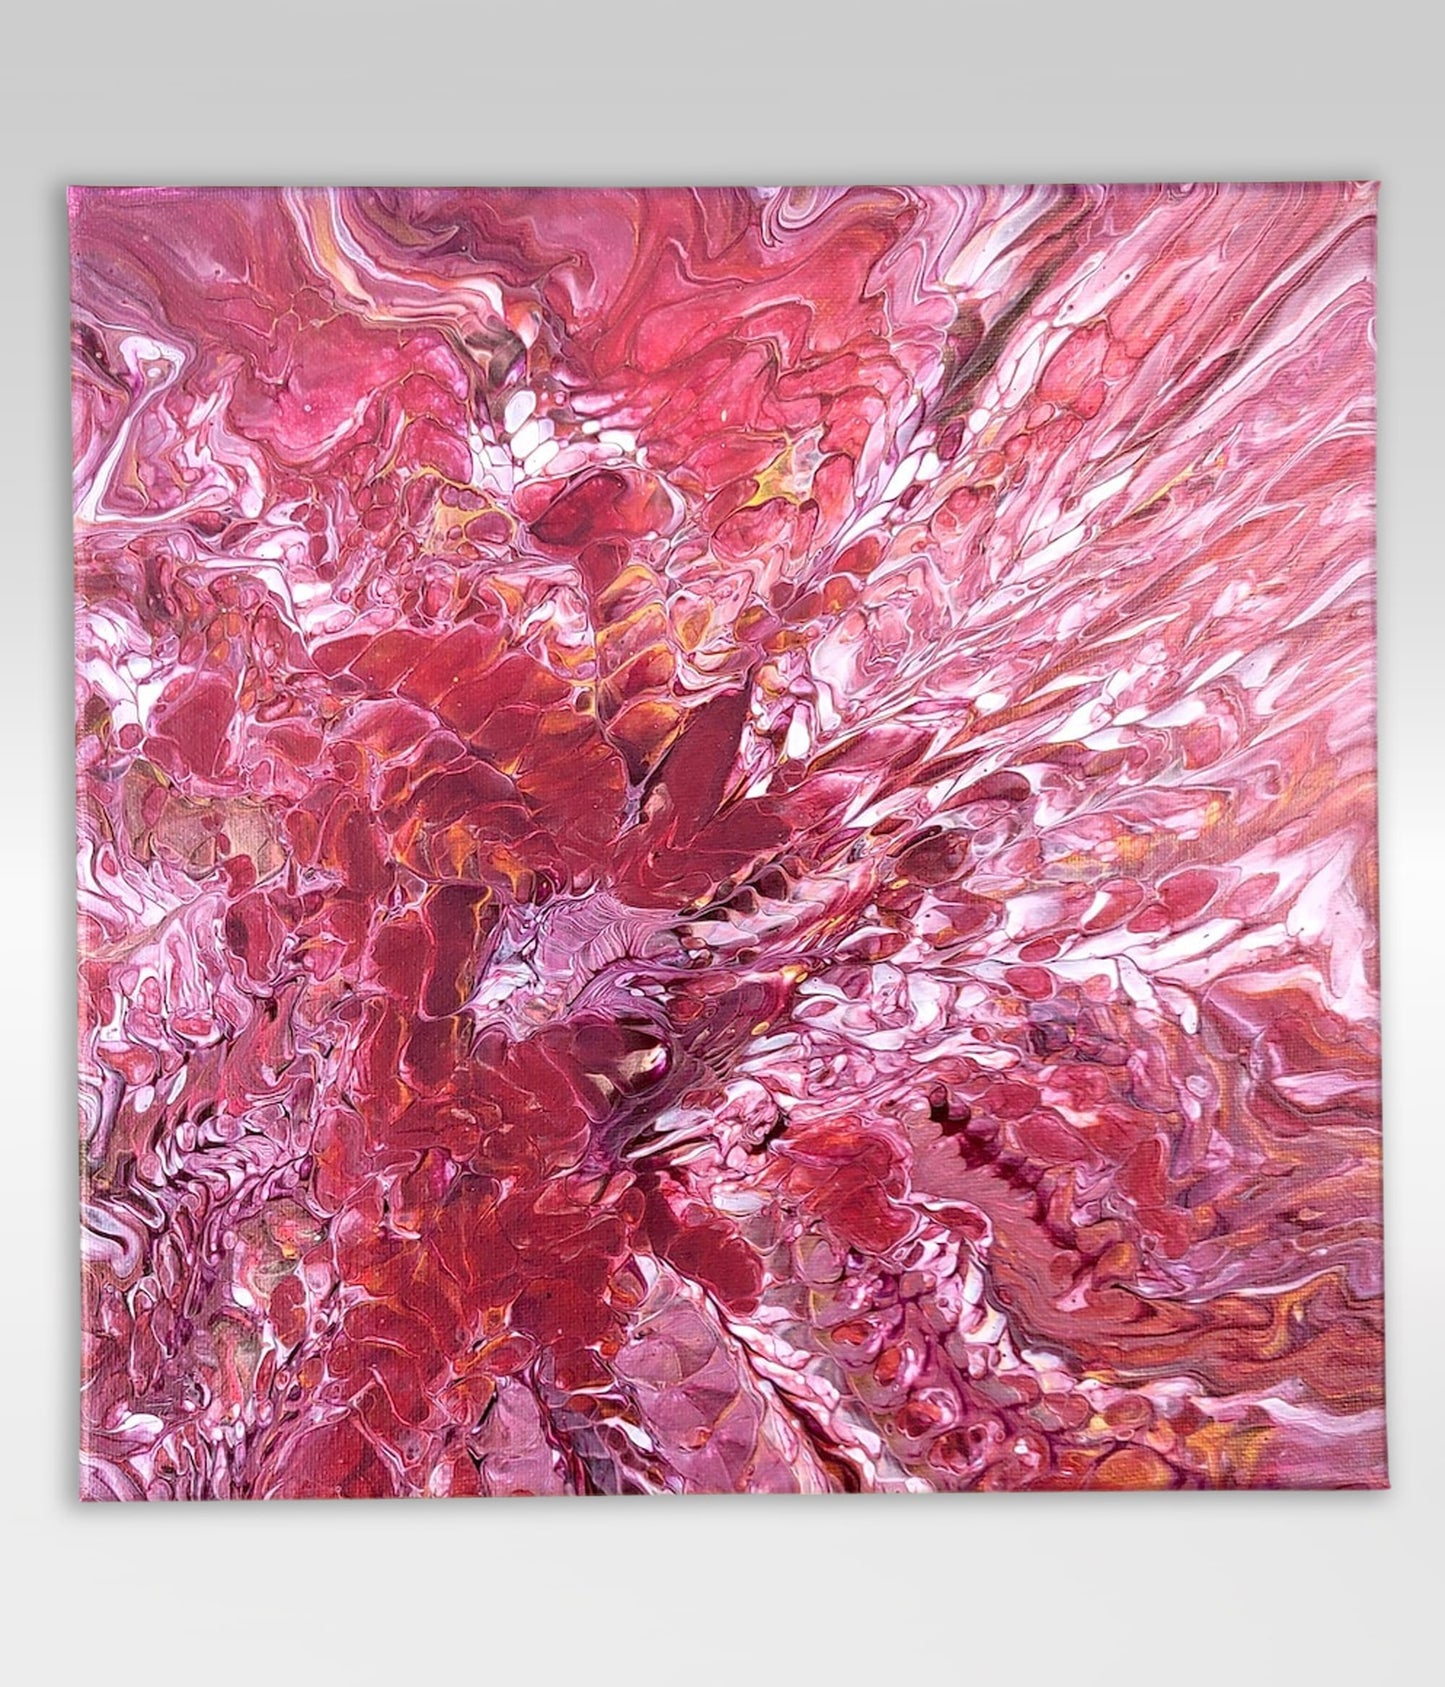 Disbelief – 12 x 12 Acrylic Pour Painting On Canvas